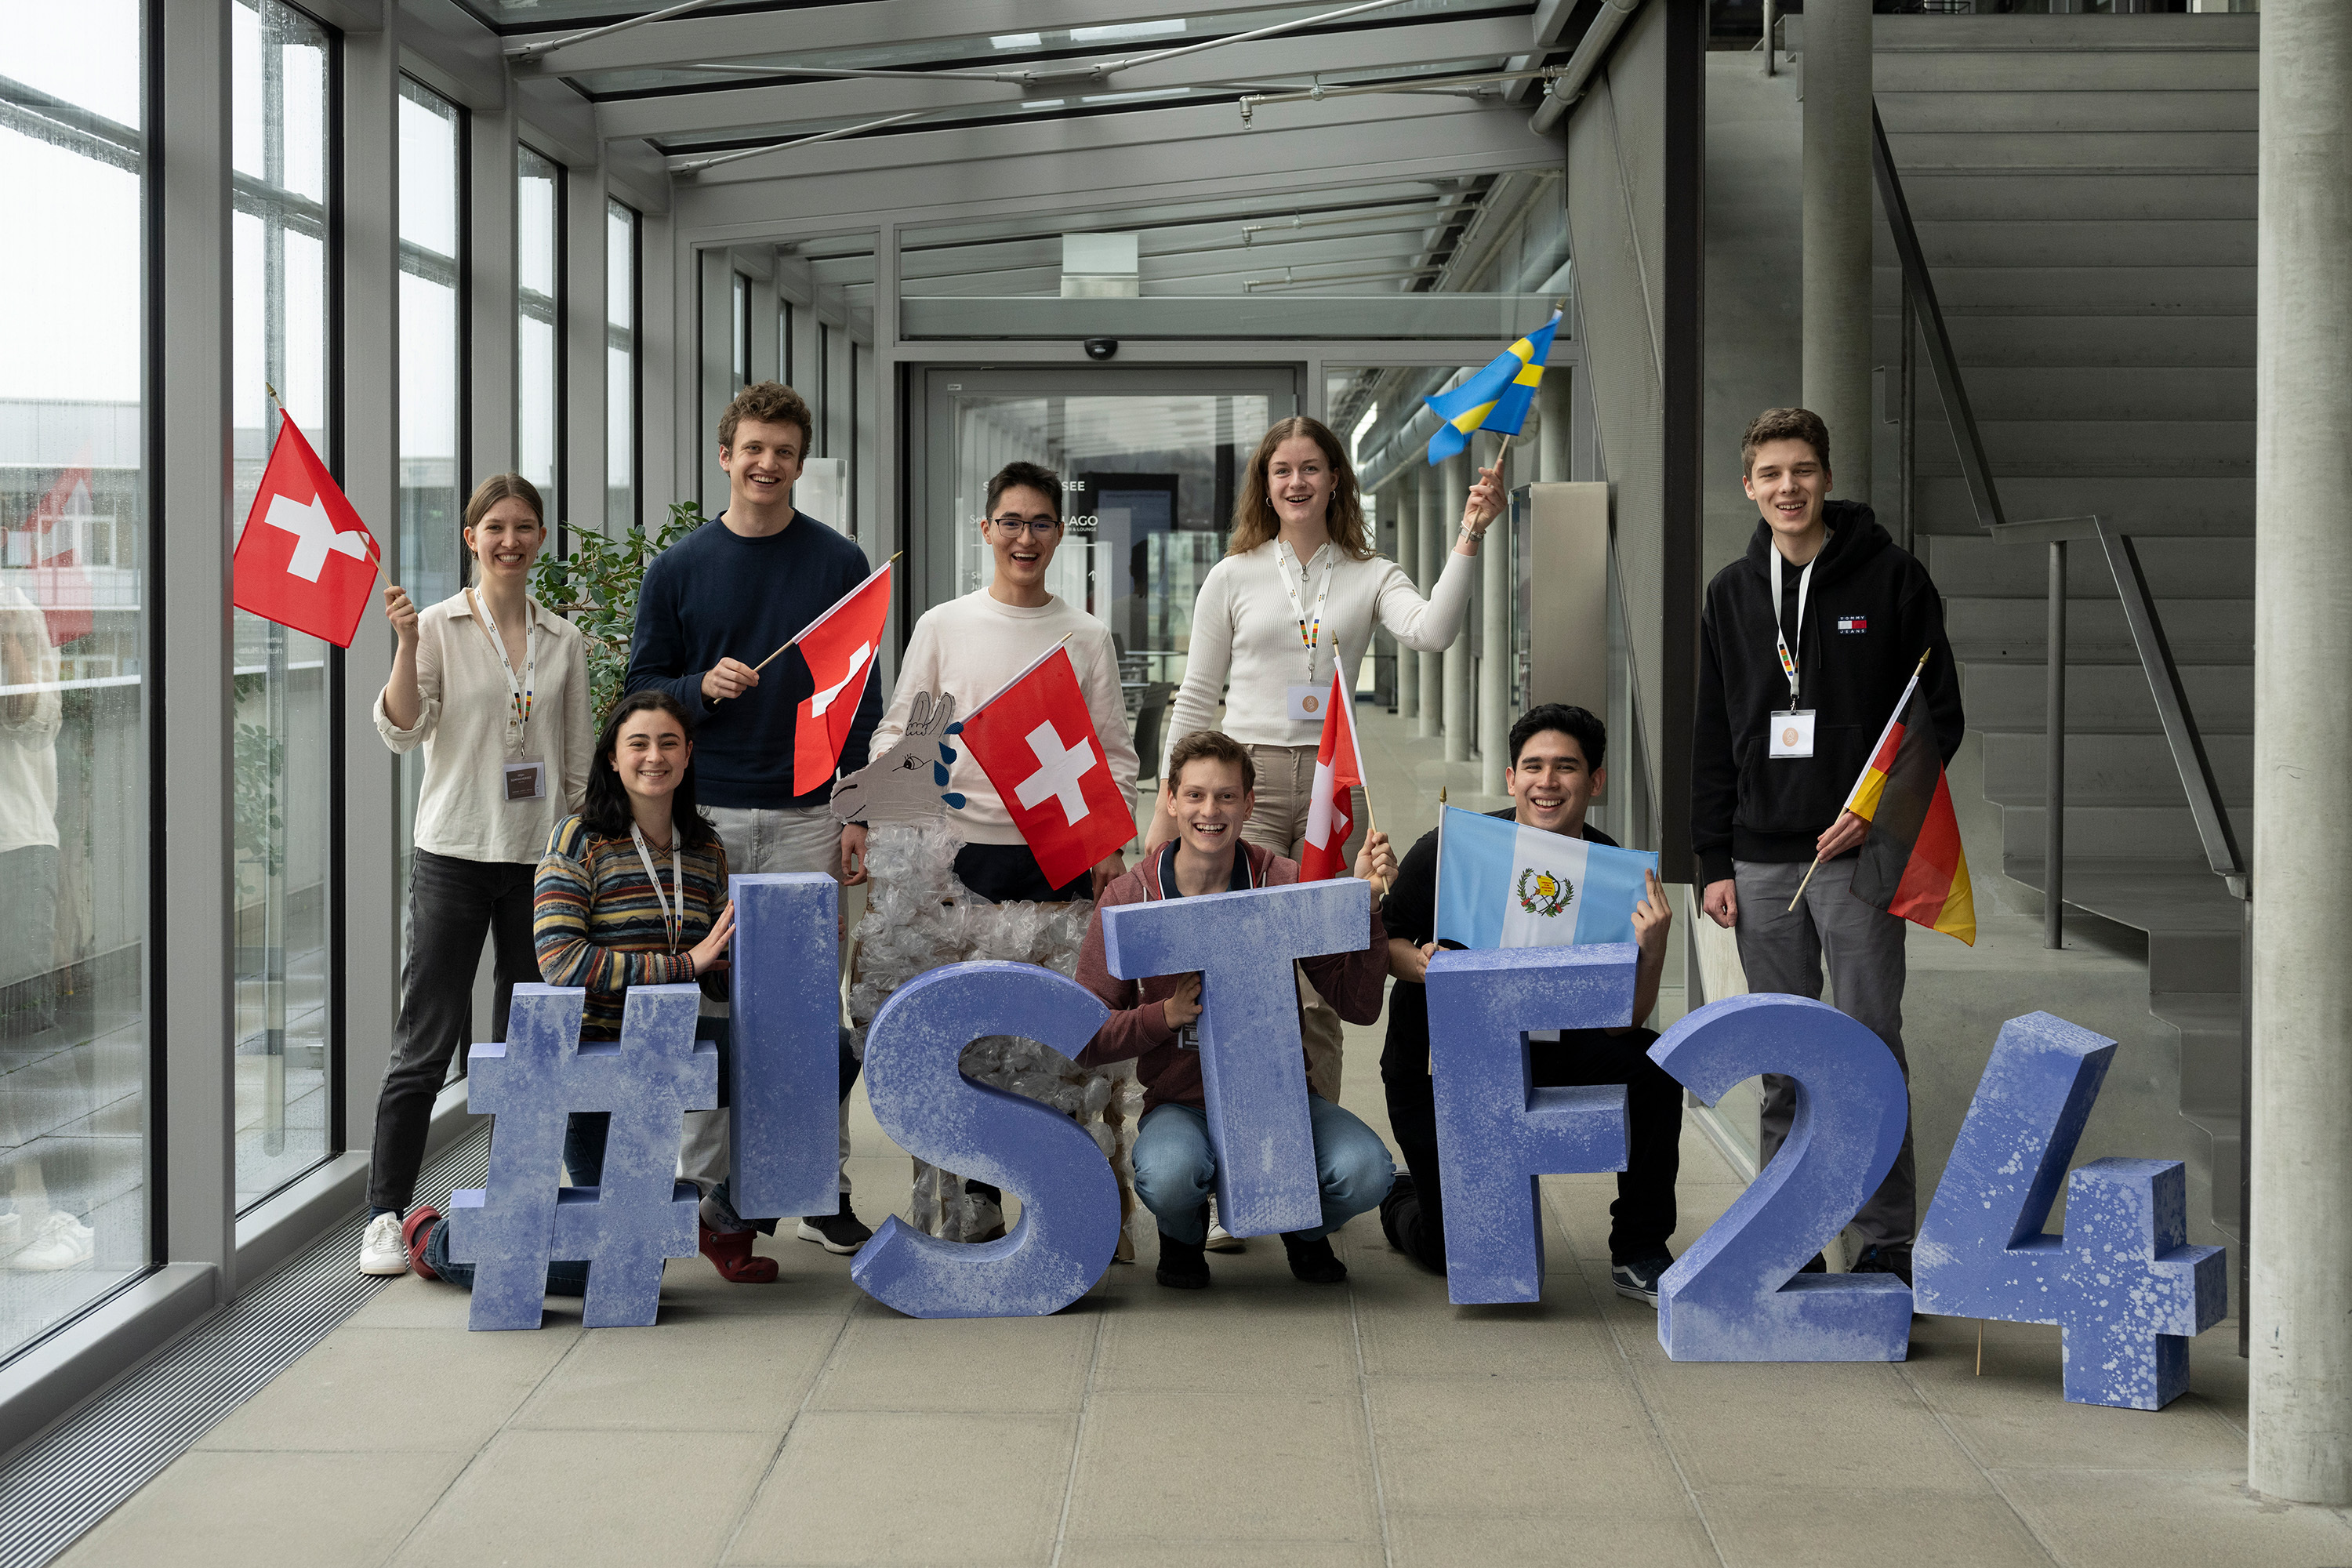 Eight talents pose with the blue letters and signs #ISTF24 and flags of their countries of origin